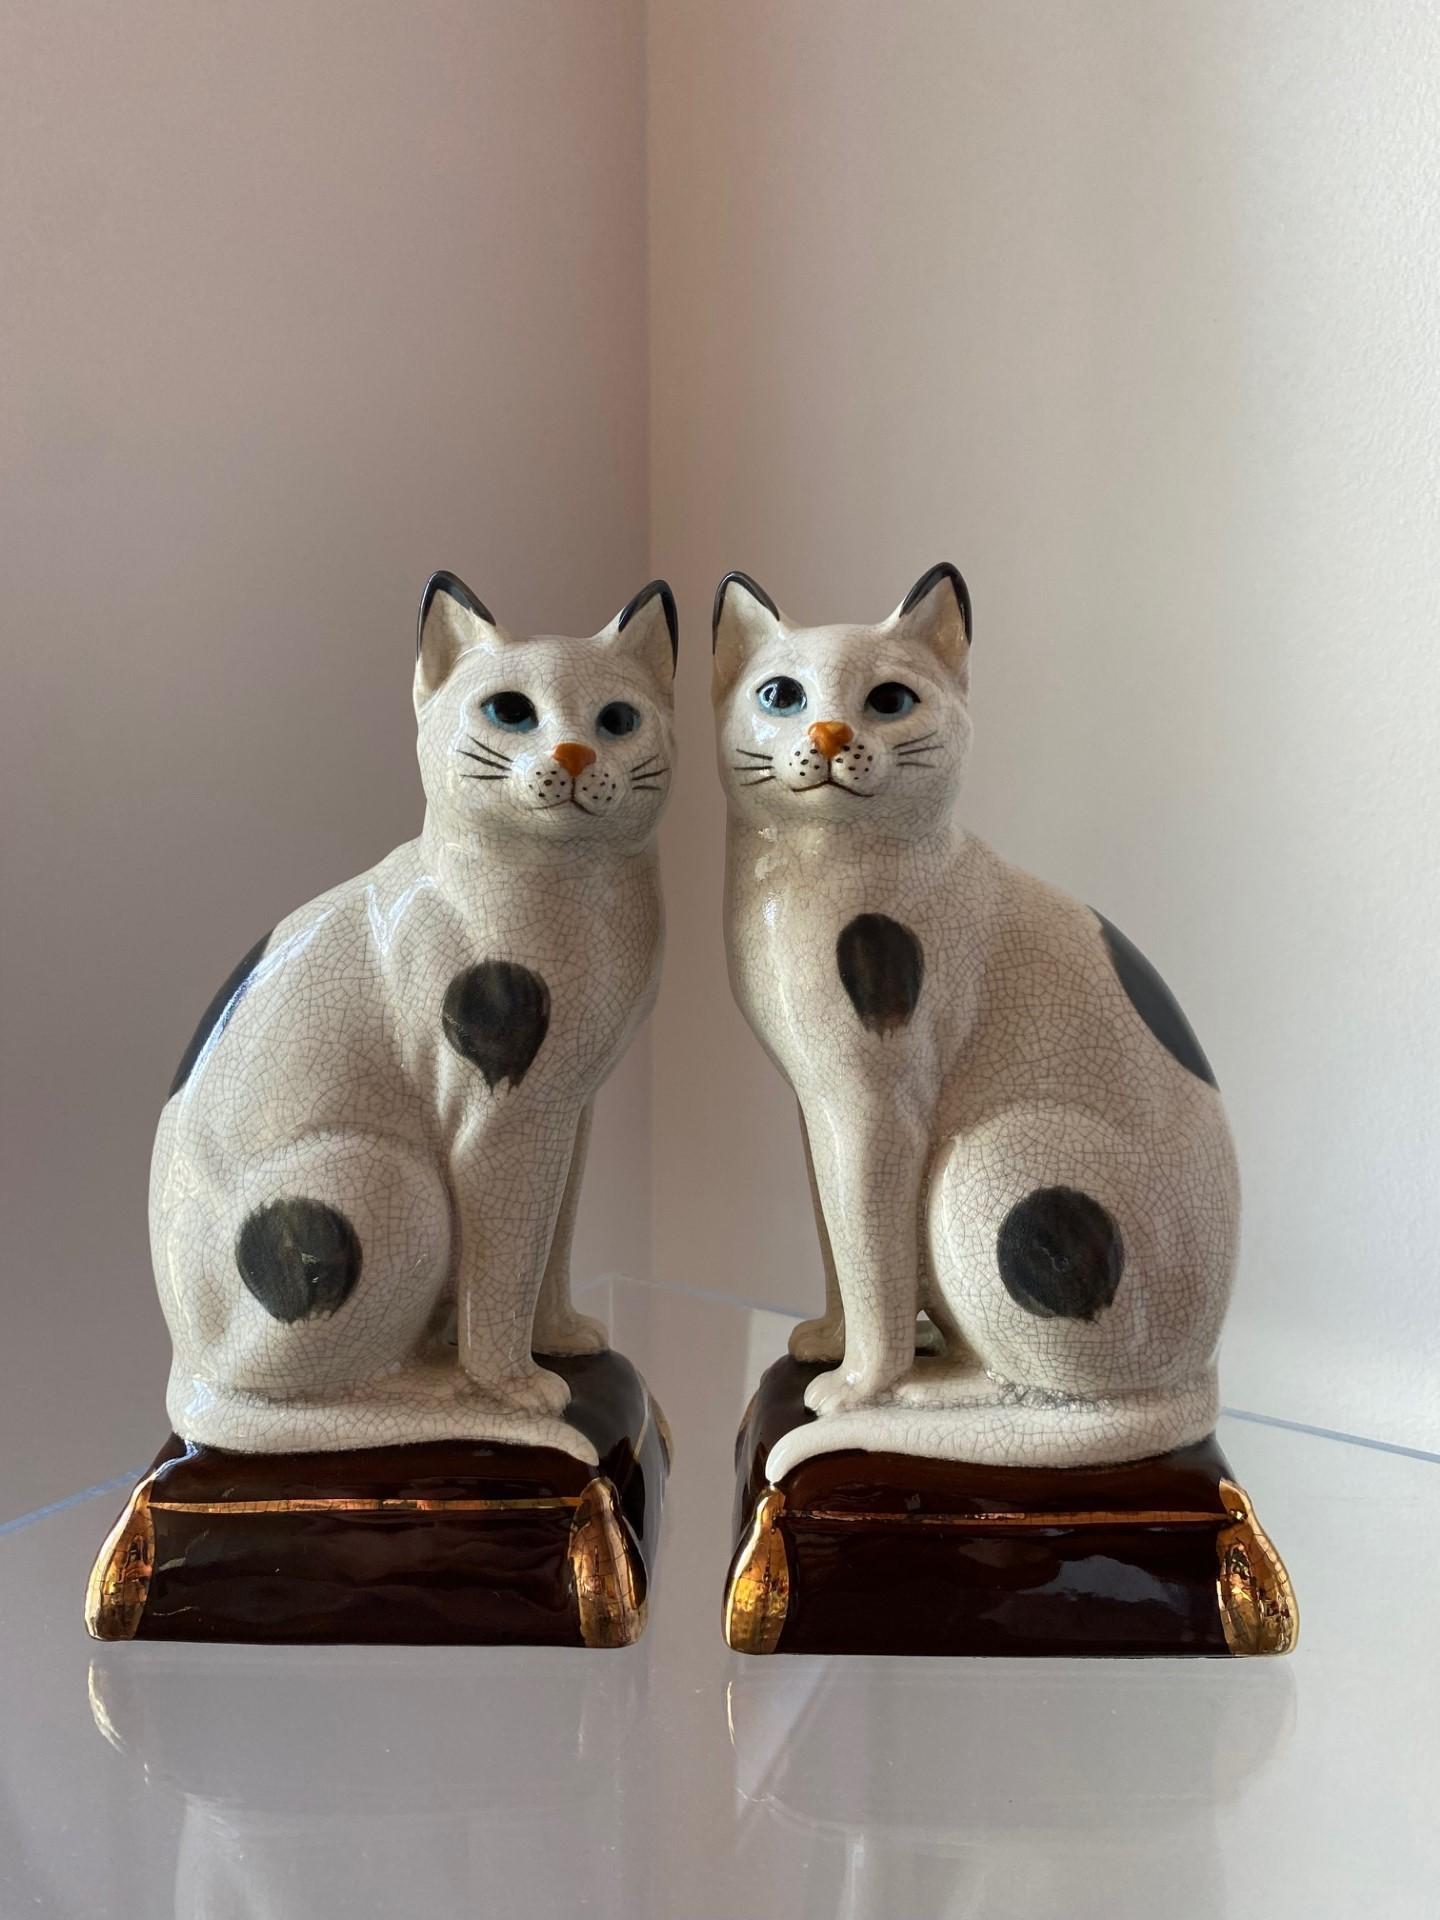 Hand-Crafted Japanese Takahashi Porcelain Cat Figures Bookends